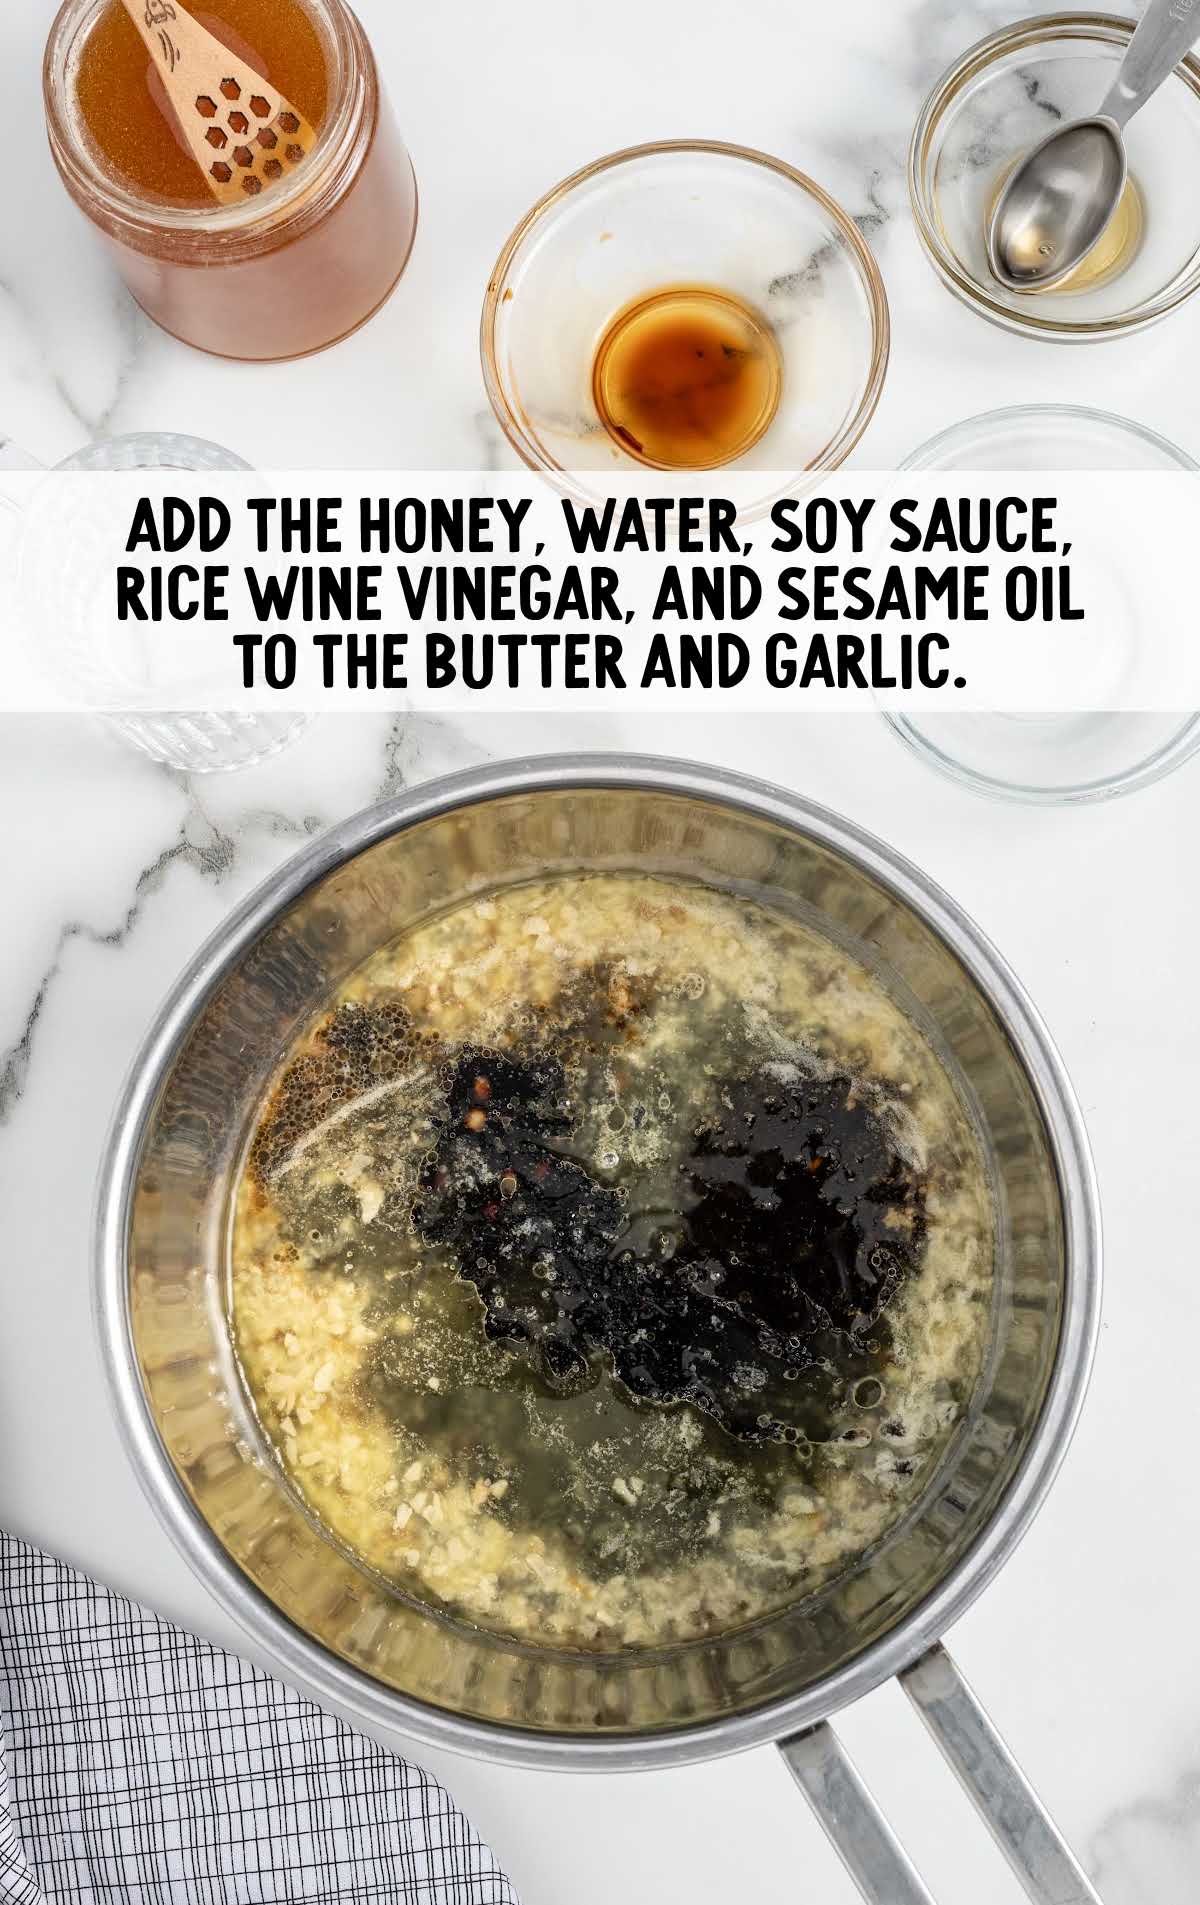 honey, water, low-sodium soy sauce, seasoned rice wine vinegar, and sesame oil added to the butter and garlic